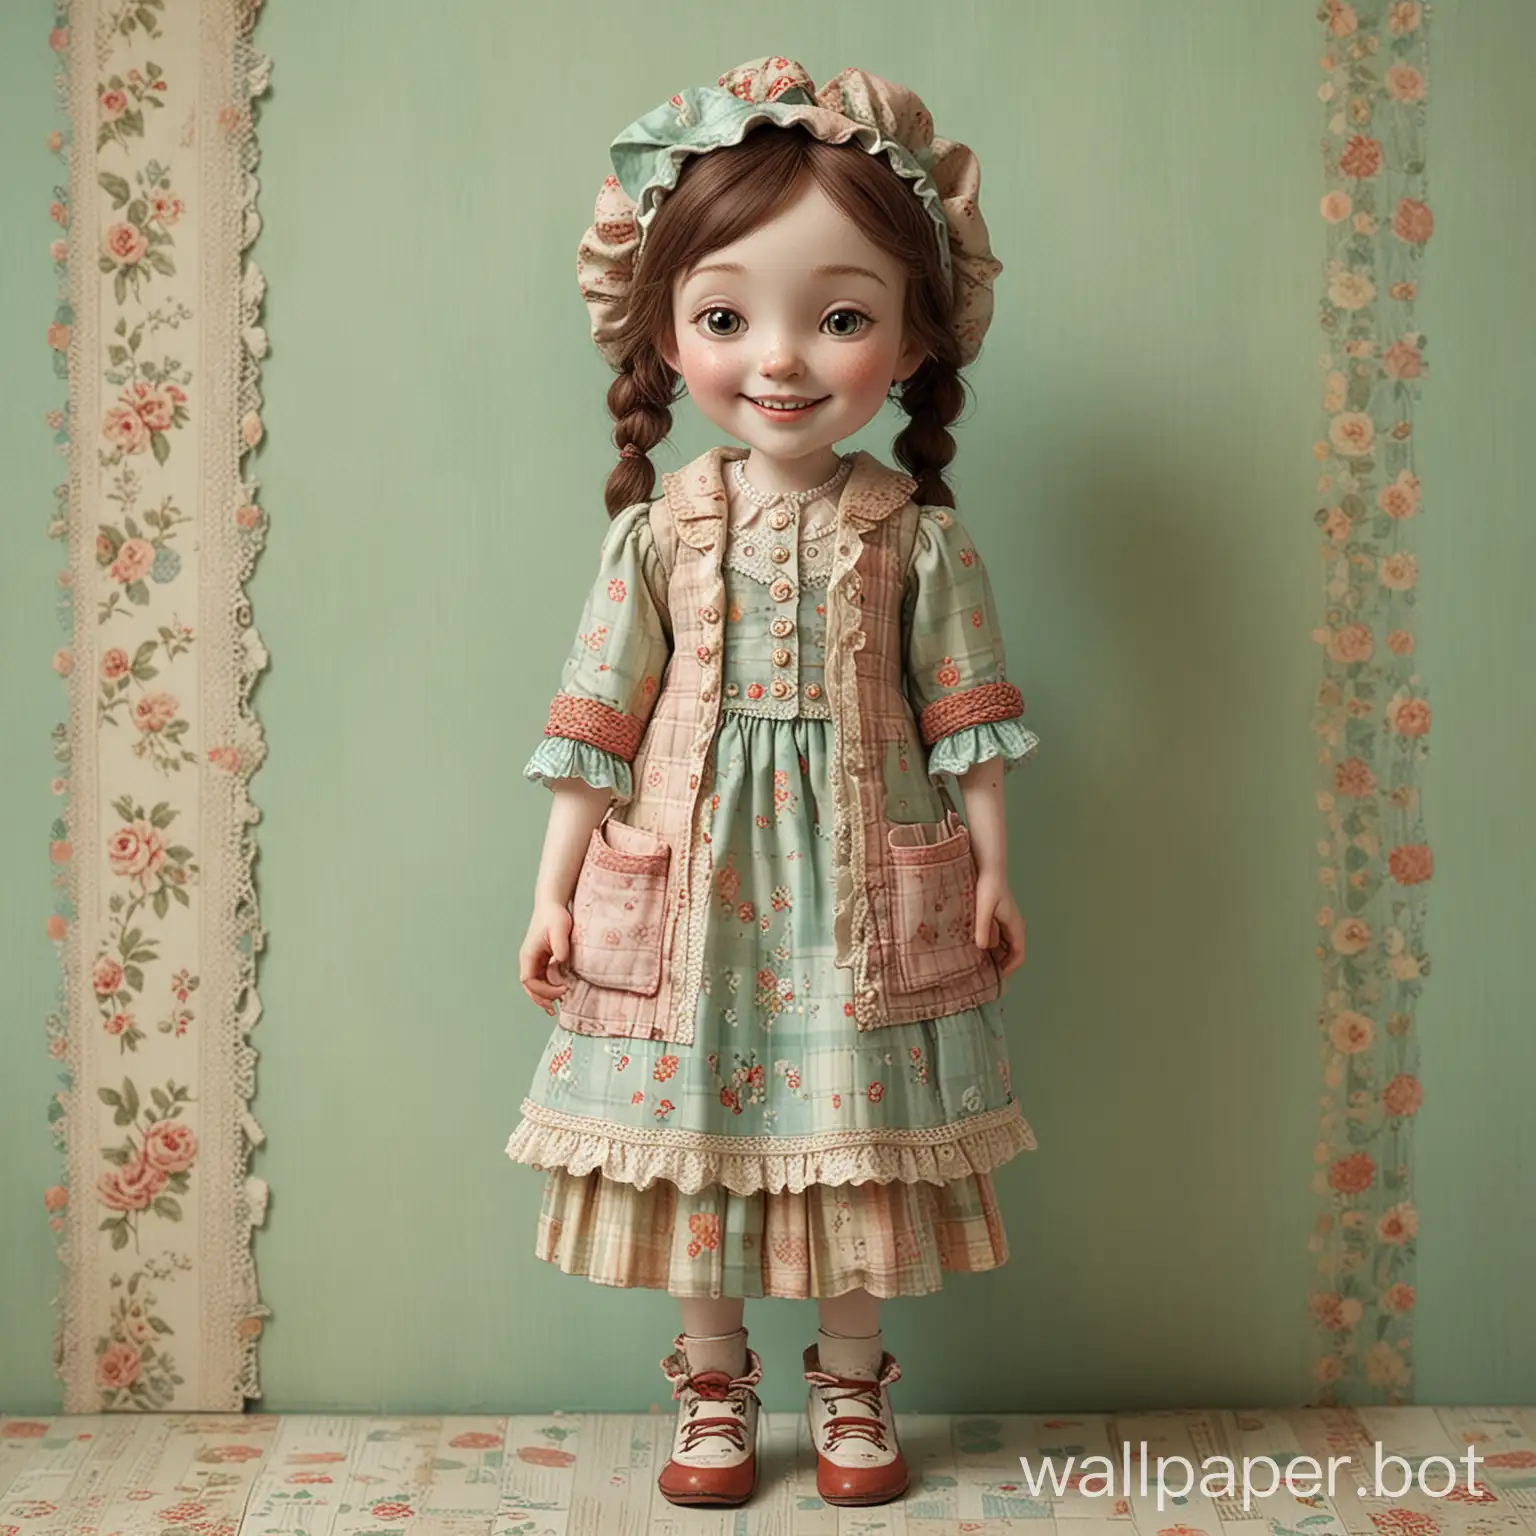 Dynamic-Freckled-Girl-in-Patchwork-Dress-on-Mint-Distressed-Background